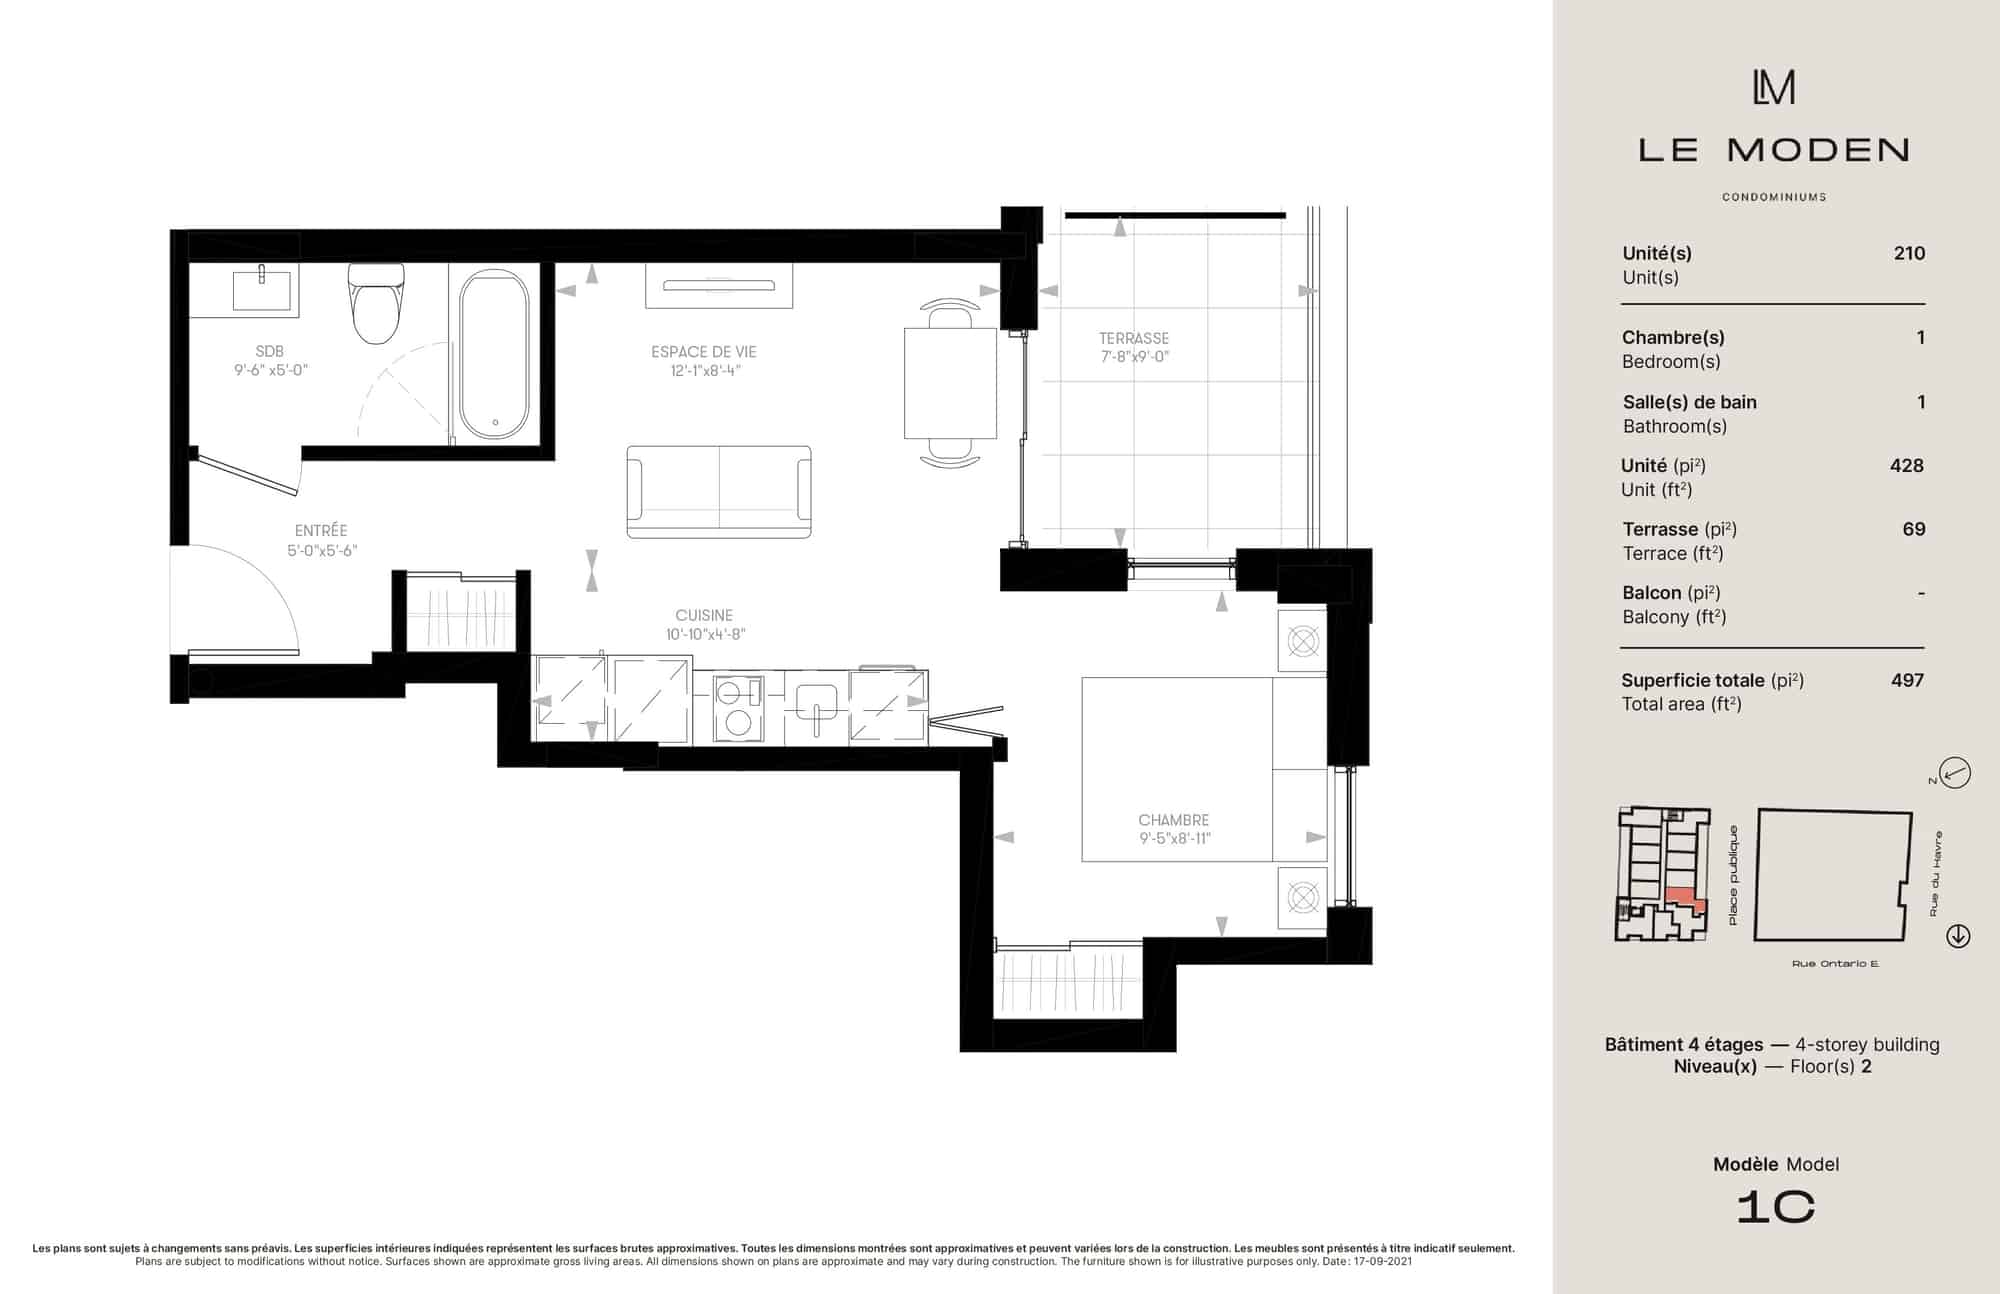  Floor Plan of Le Moden Condominiums with undefined beds